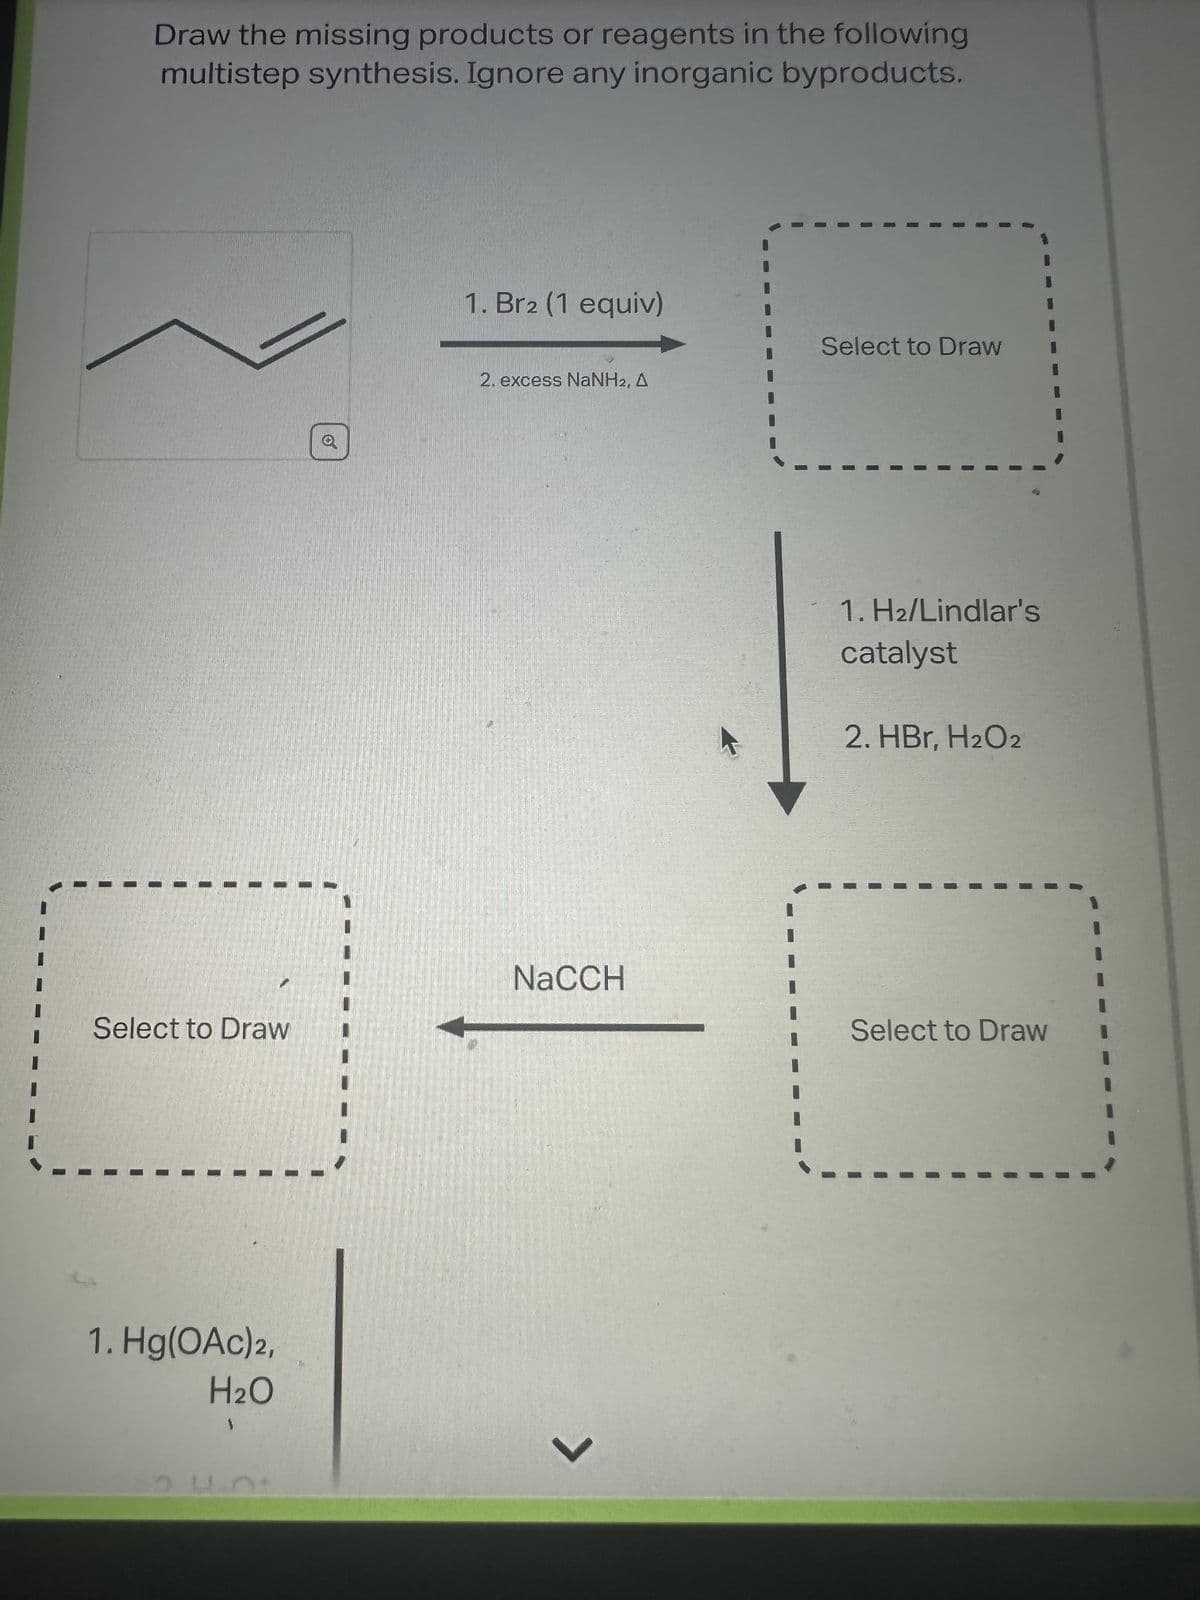 Draw the missing products or reagents in the following
multistep synthesis. Ignore any inorganic byproducts.
Select to Draw
1. Hg(OAc)2,
H₂O
1
1. Br2 (1 equiv)
2. excess NaNH2, A
NaCCH
L
Select to Draw
1. H2/Lindlar's
catalyst
2. HBr, H₂O2
Select to Draw